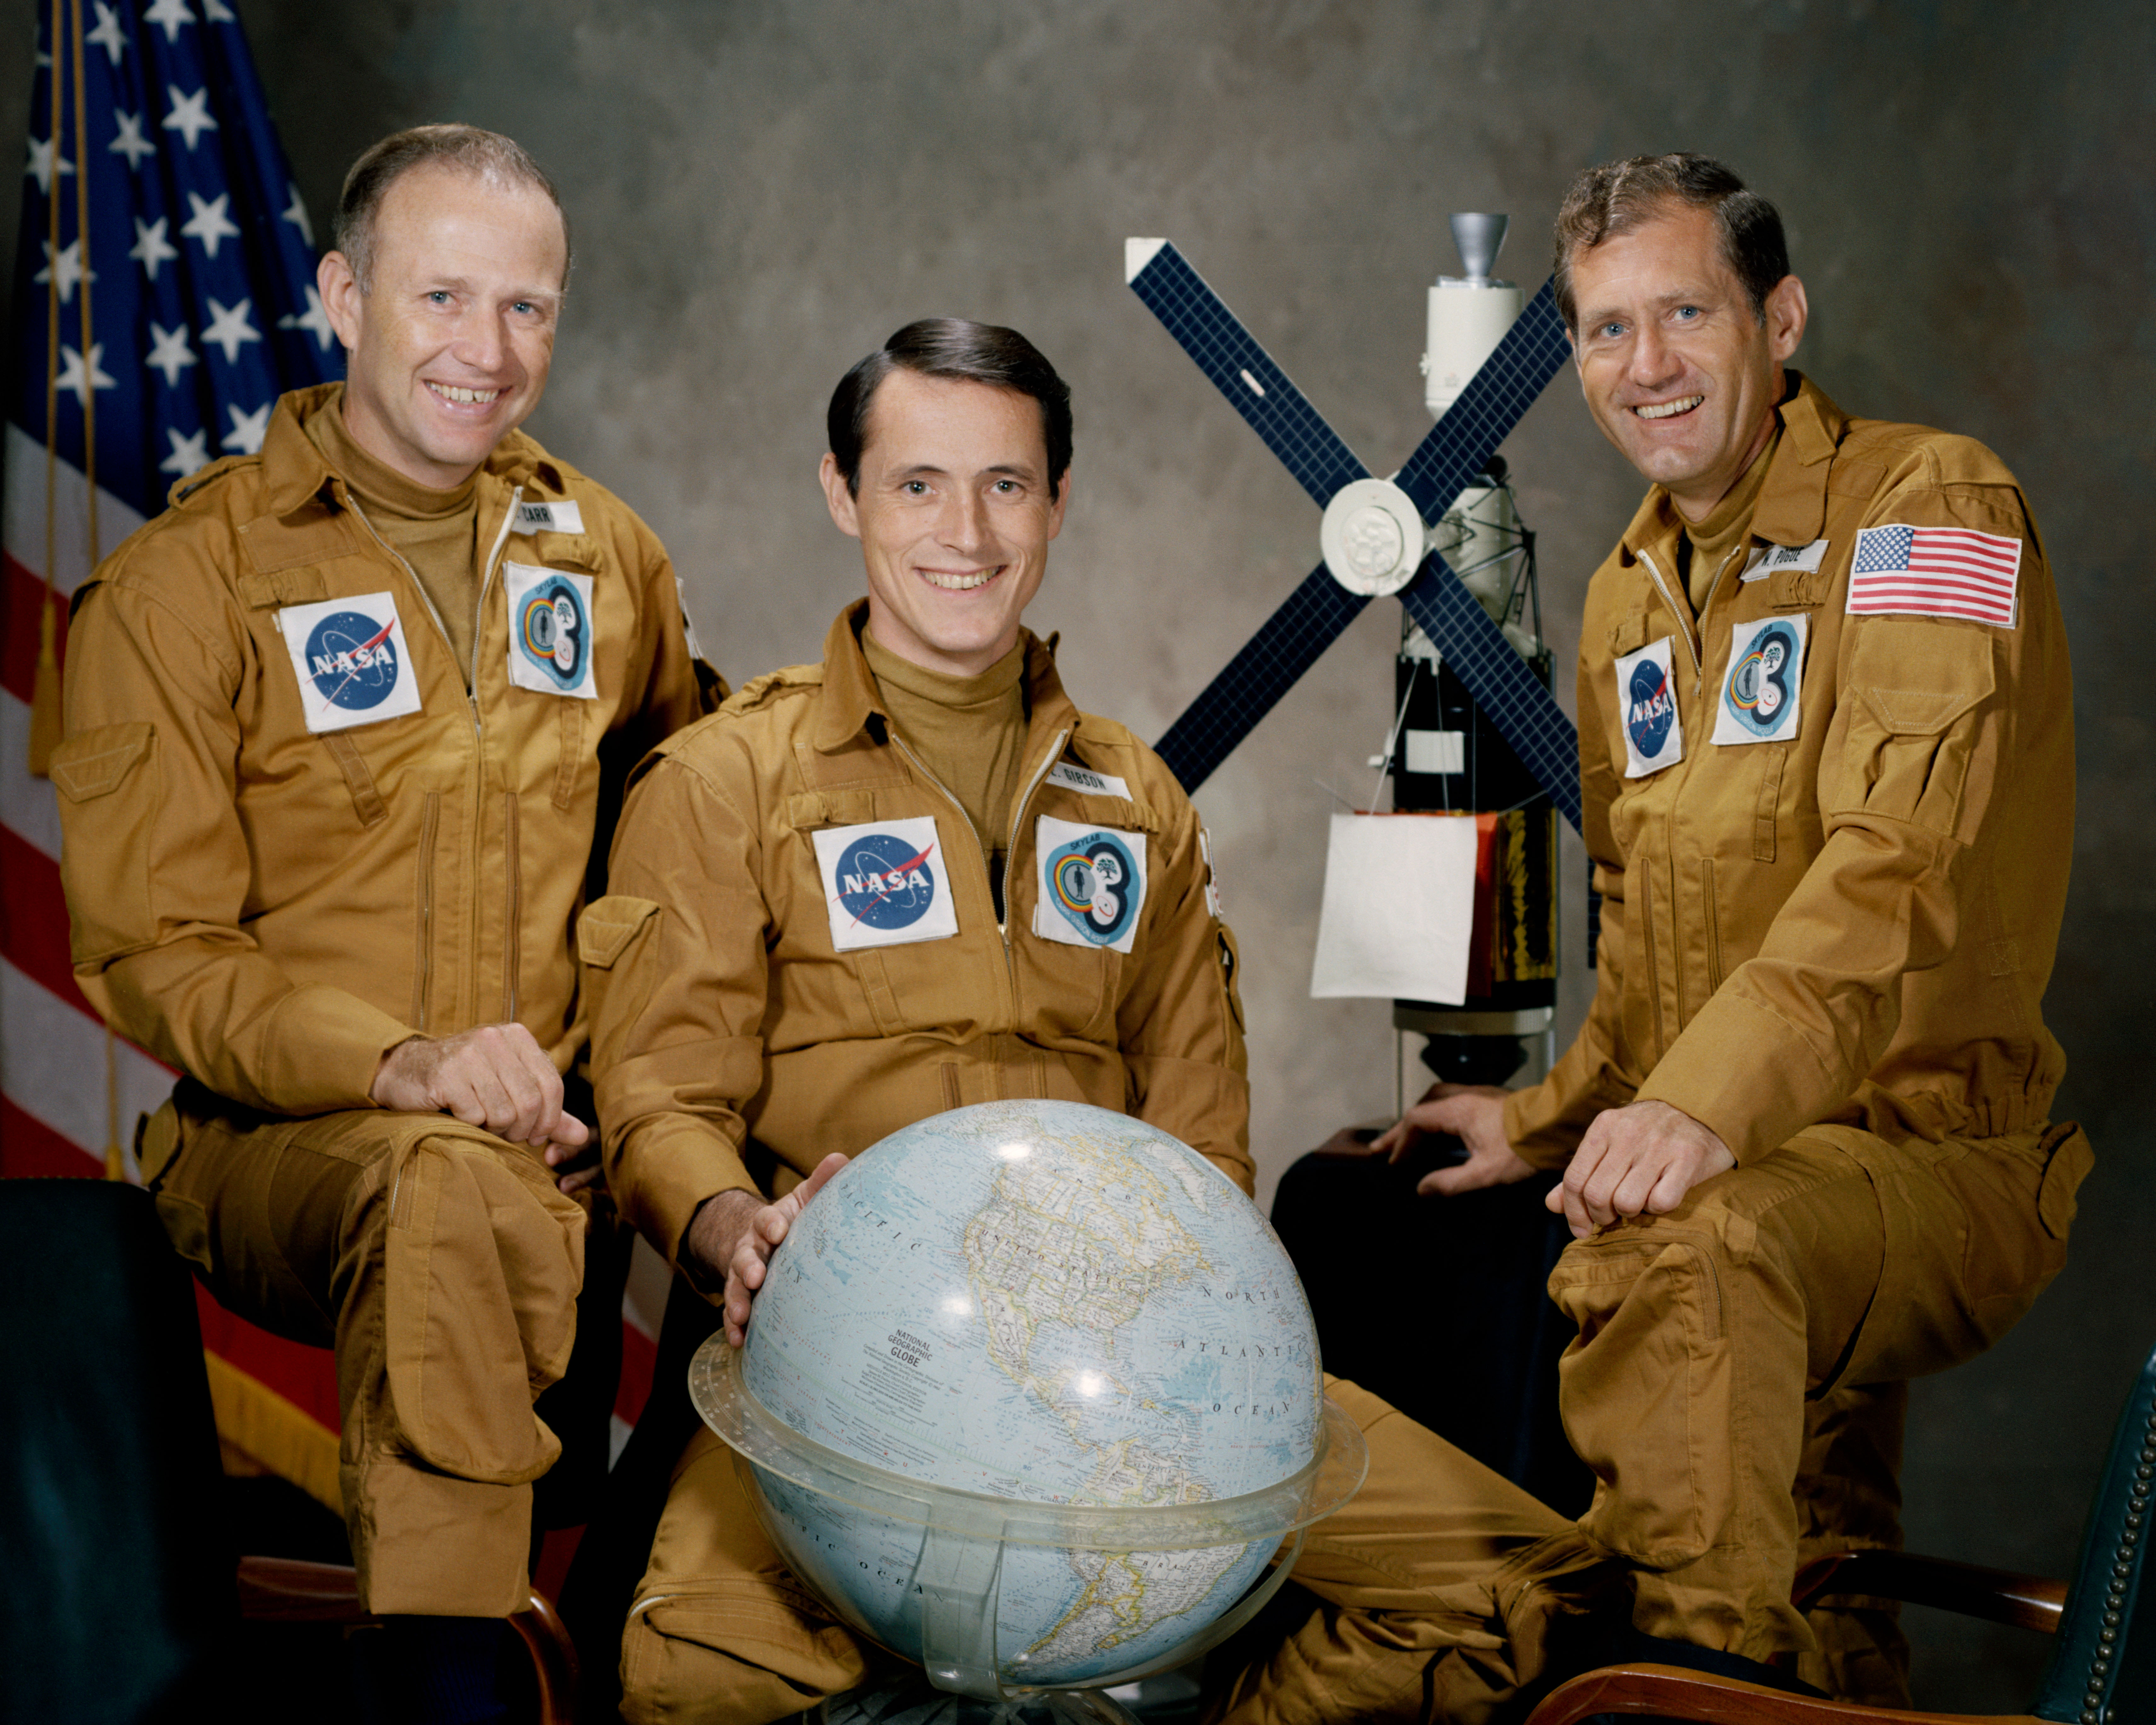 Skylab 4 astronauts Gerald P. Carr, Edward G. Gibson, and William R. Pogue